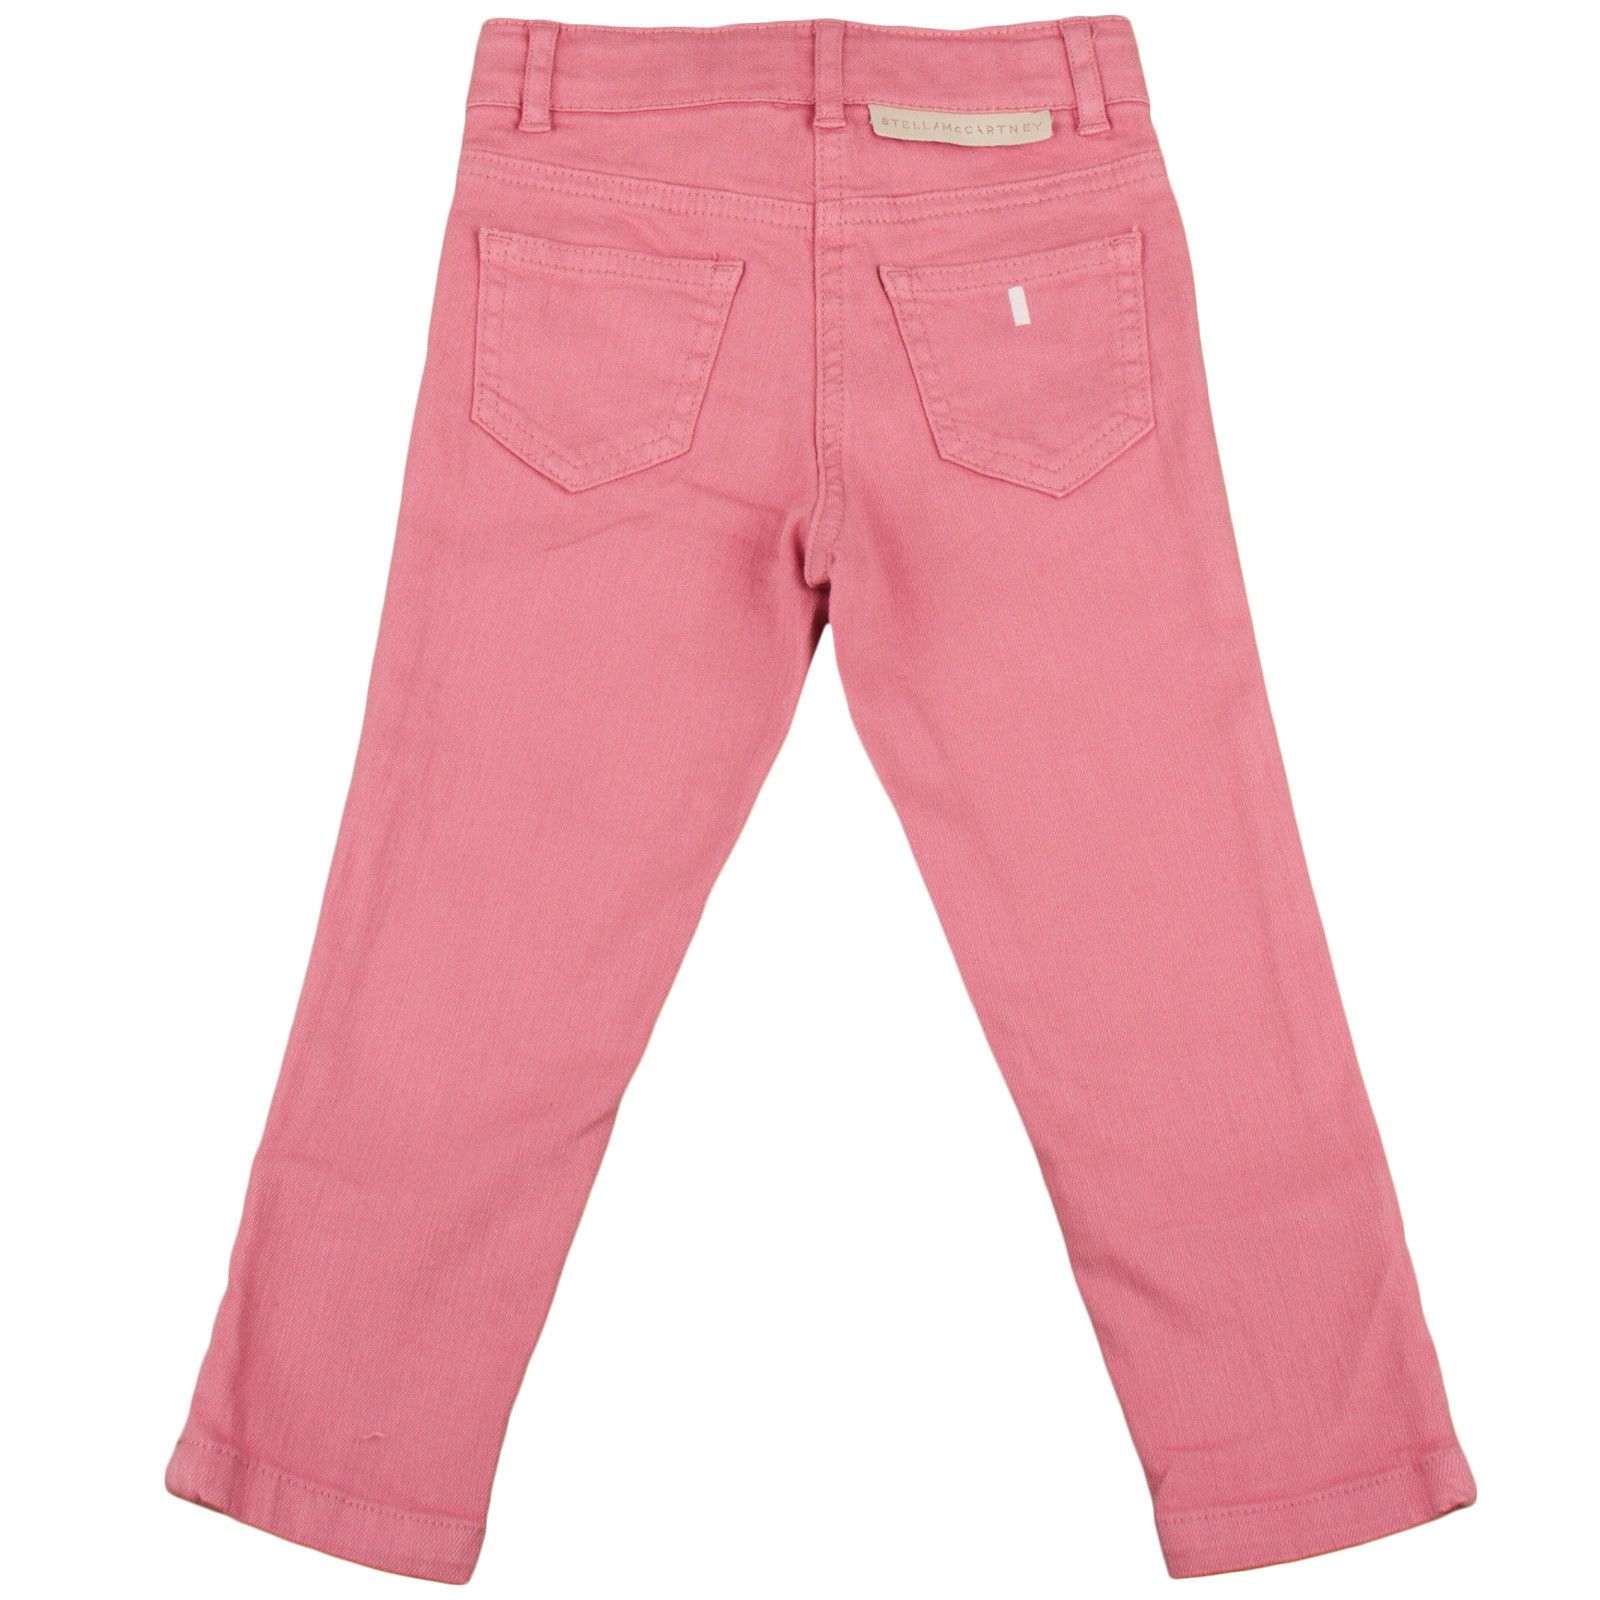 Nina Girls Red Cotton Trousers With Zips At The Ankle - CÉMAROSE | Children's Fashion Store - 2